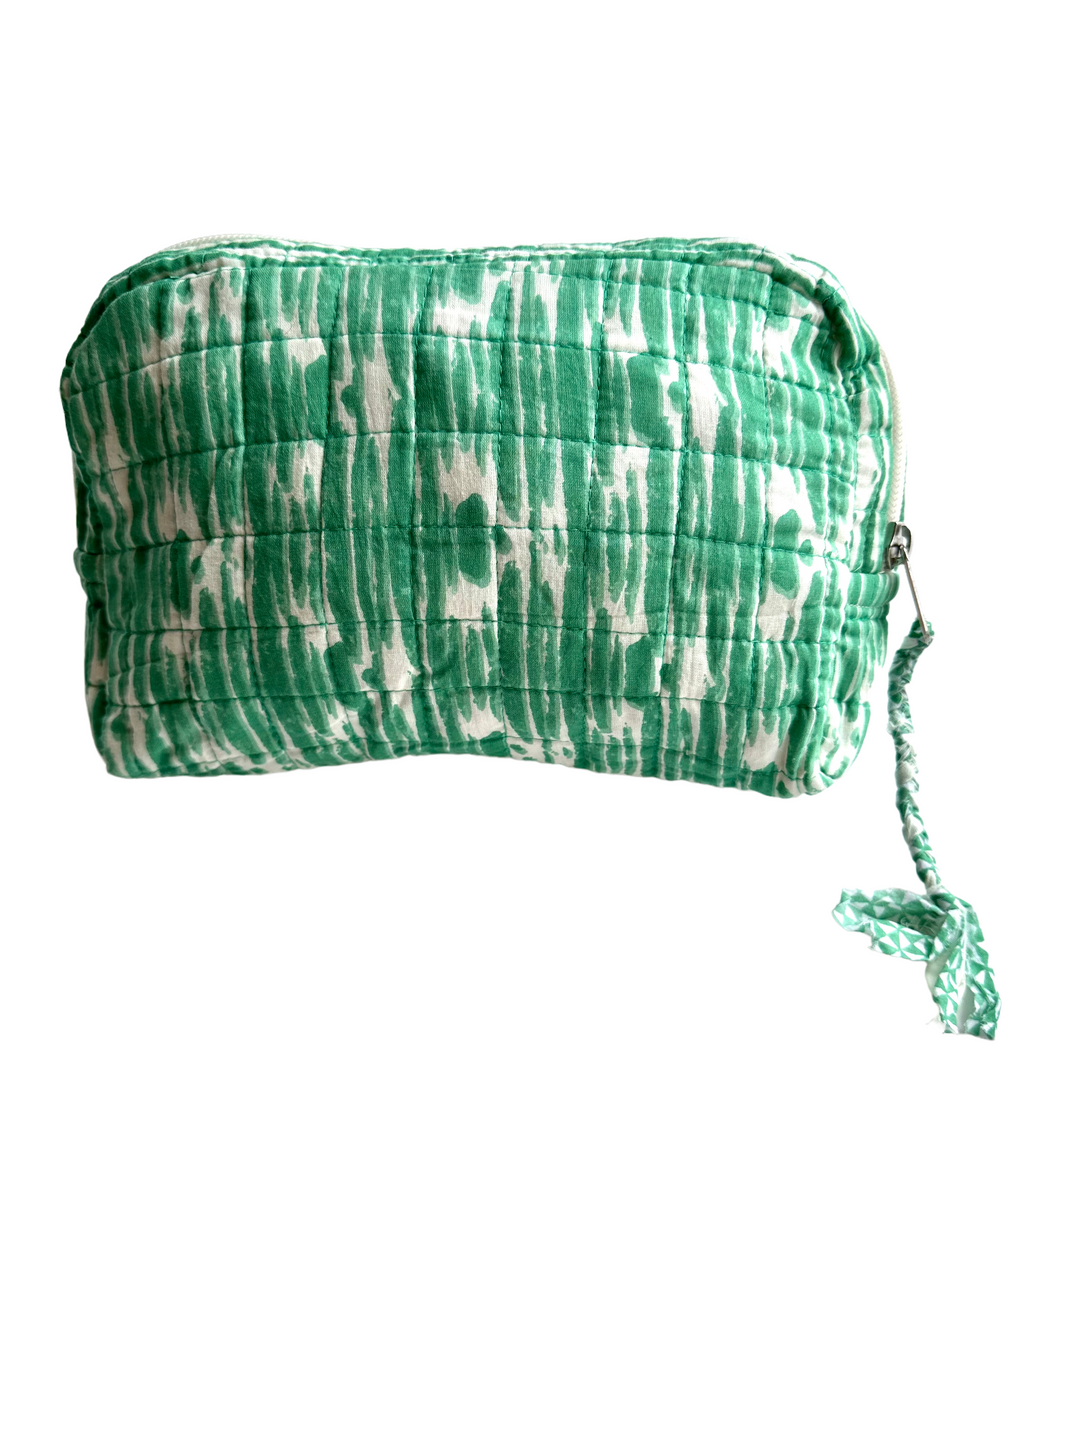 Greens - travel pouch